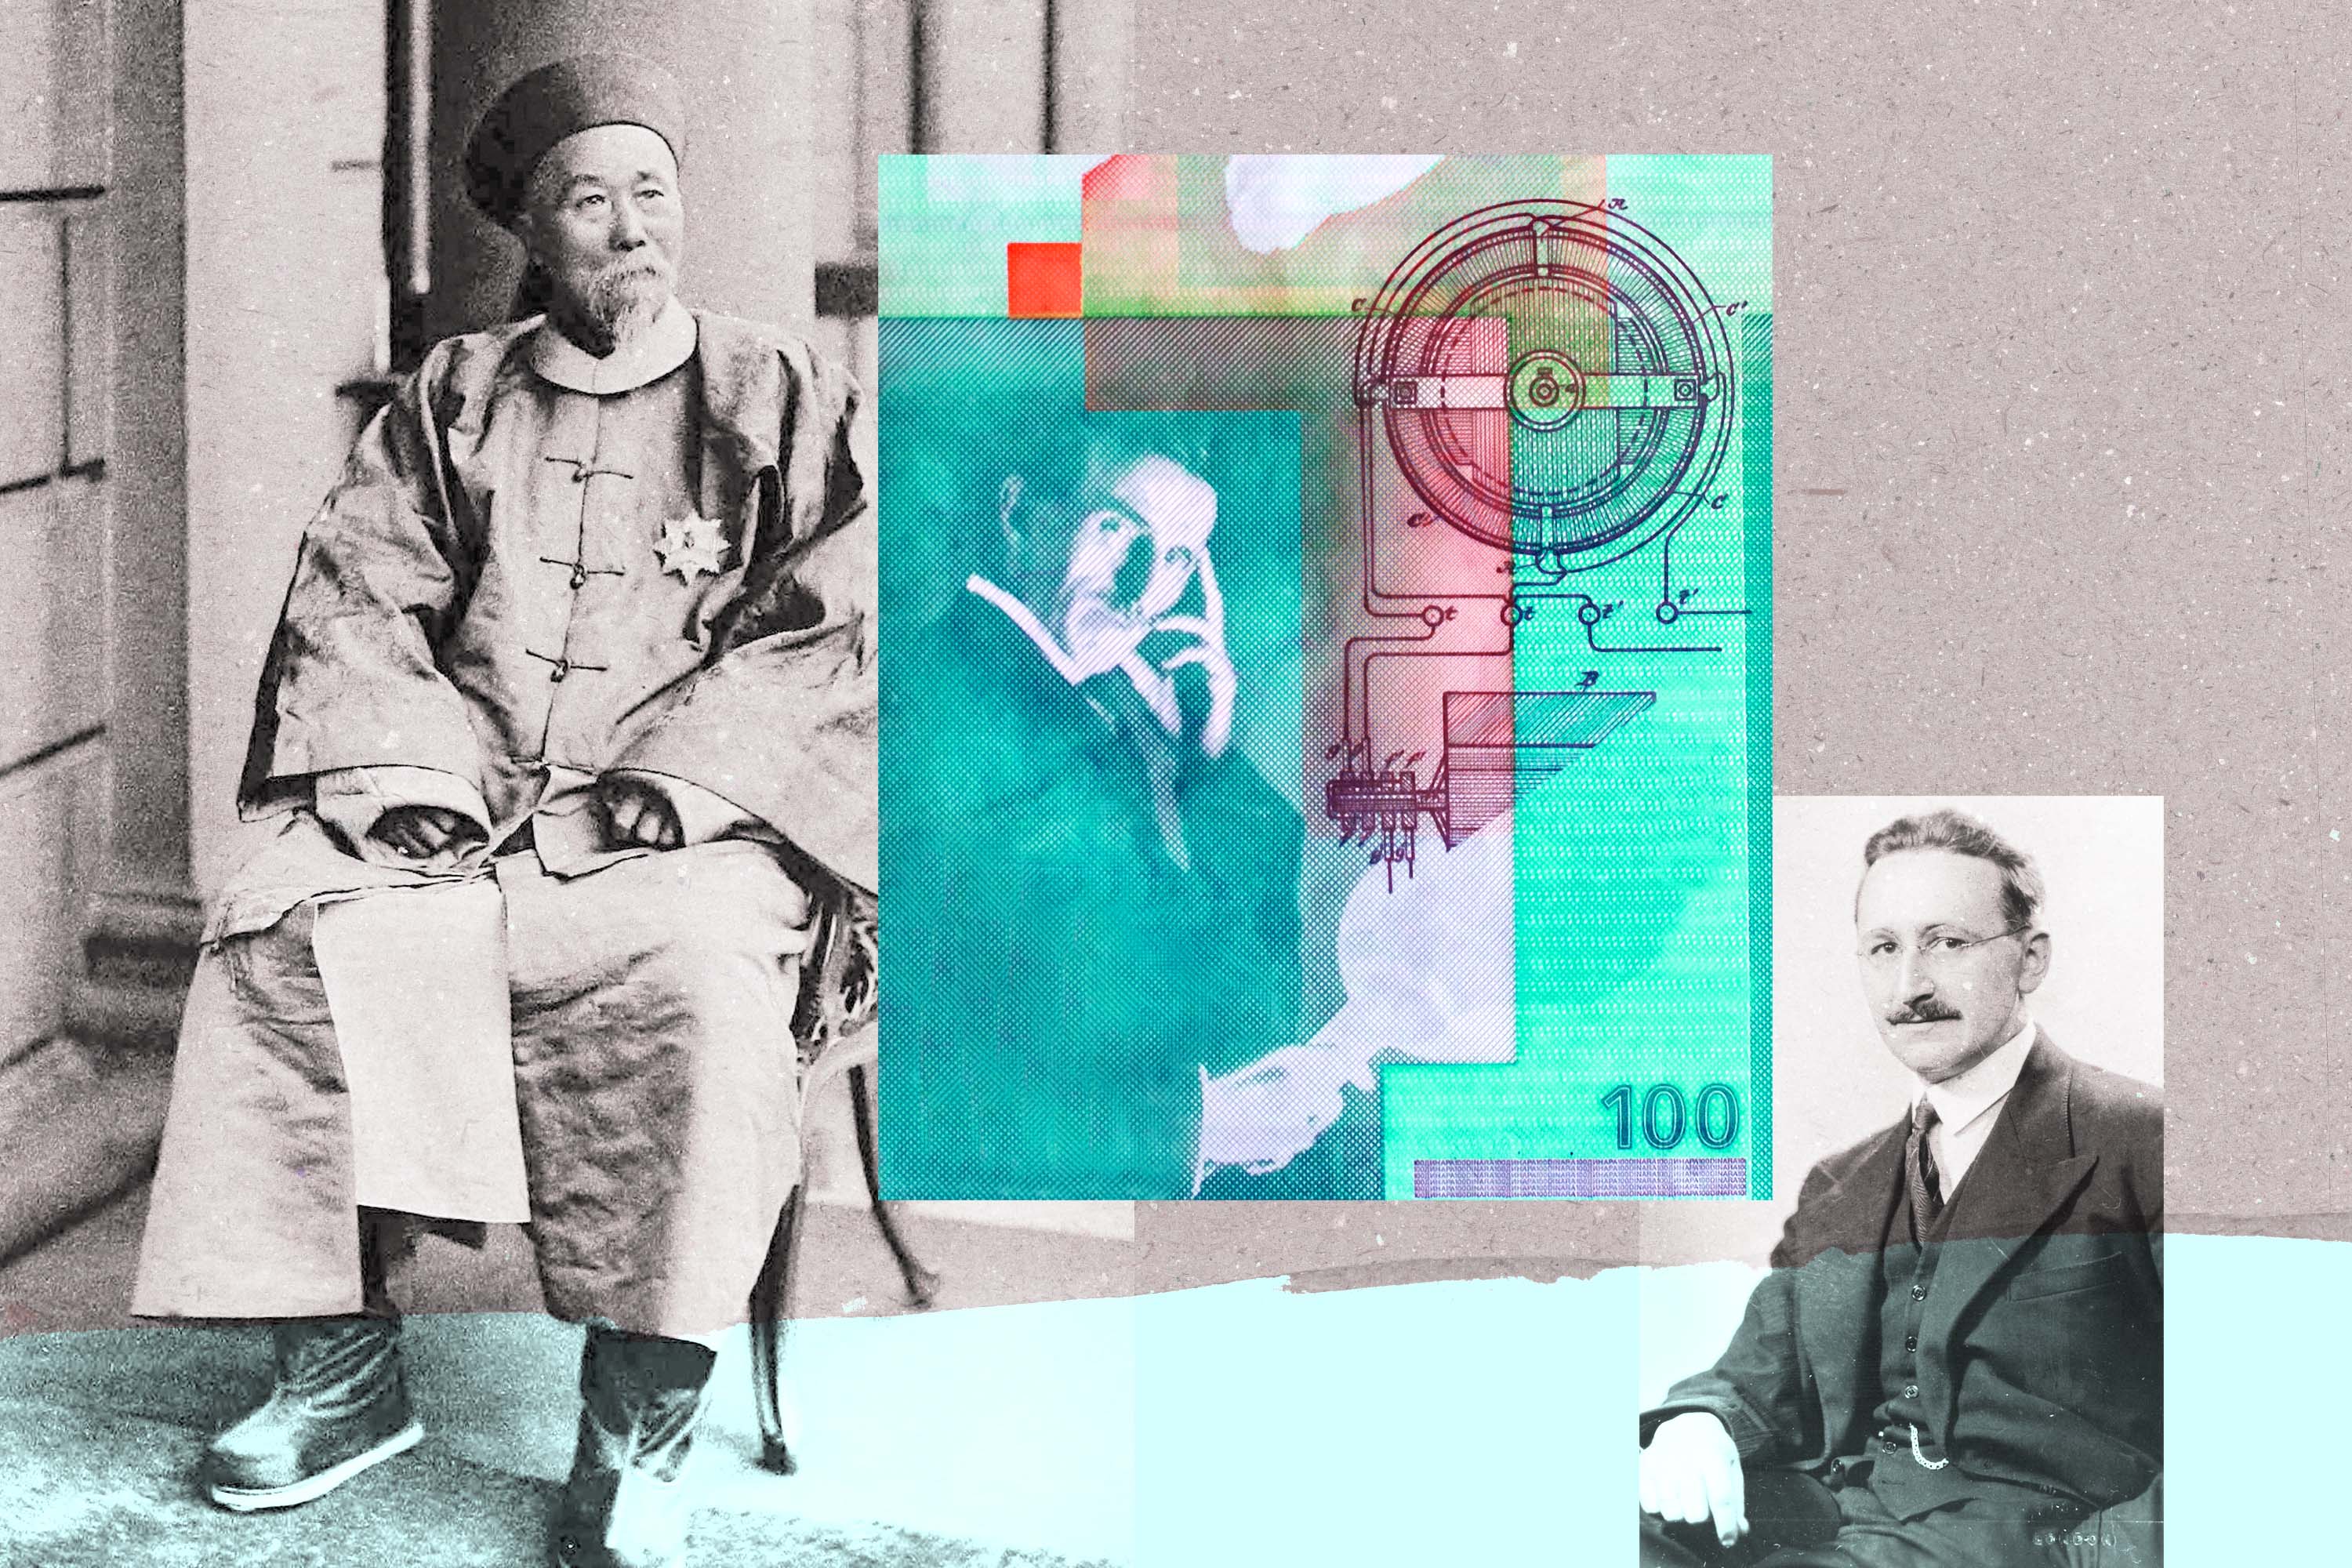 An illustration combines images of Li Hongzhang, Nikola Tesla, and Friedrich Hayek with a currency note and mechanical diagram, in muted tones of gray and blue-green.